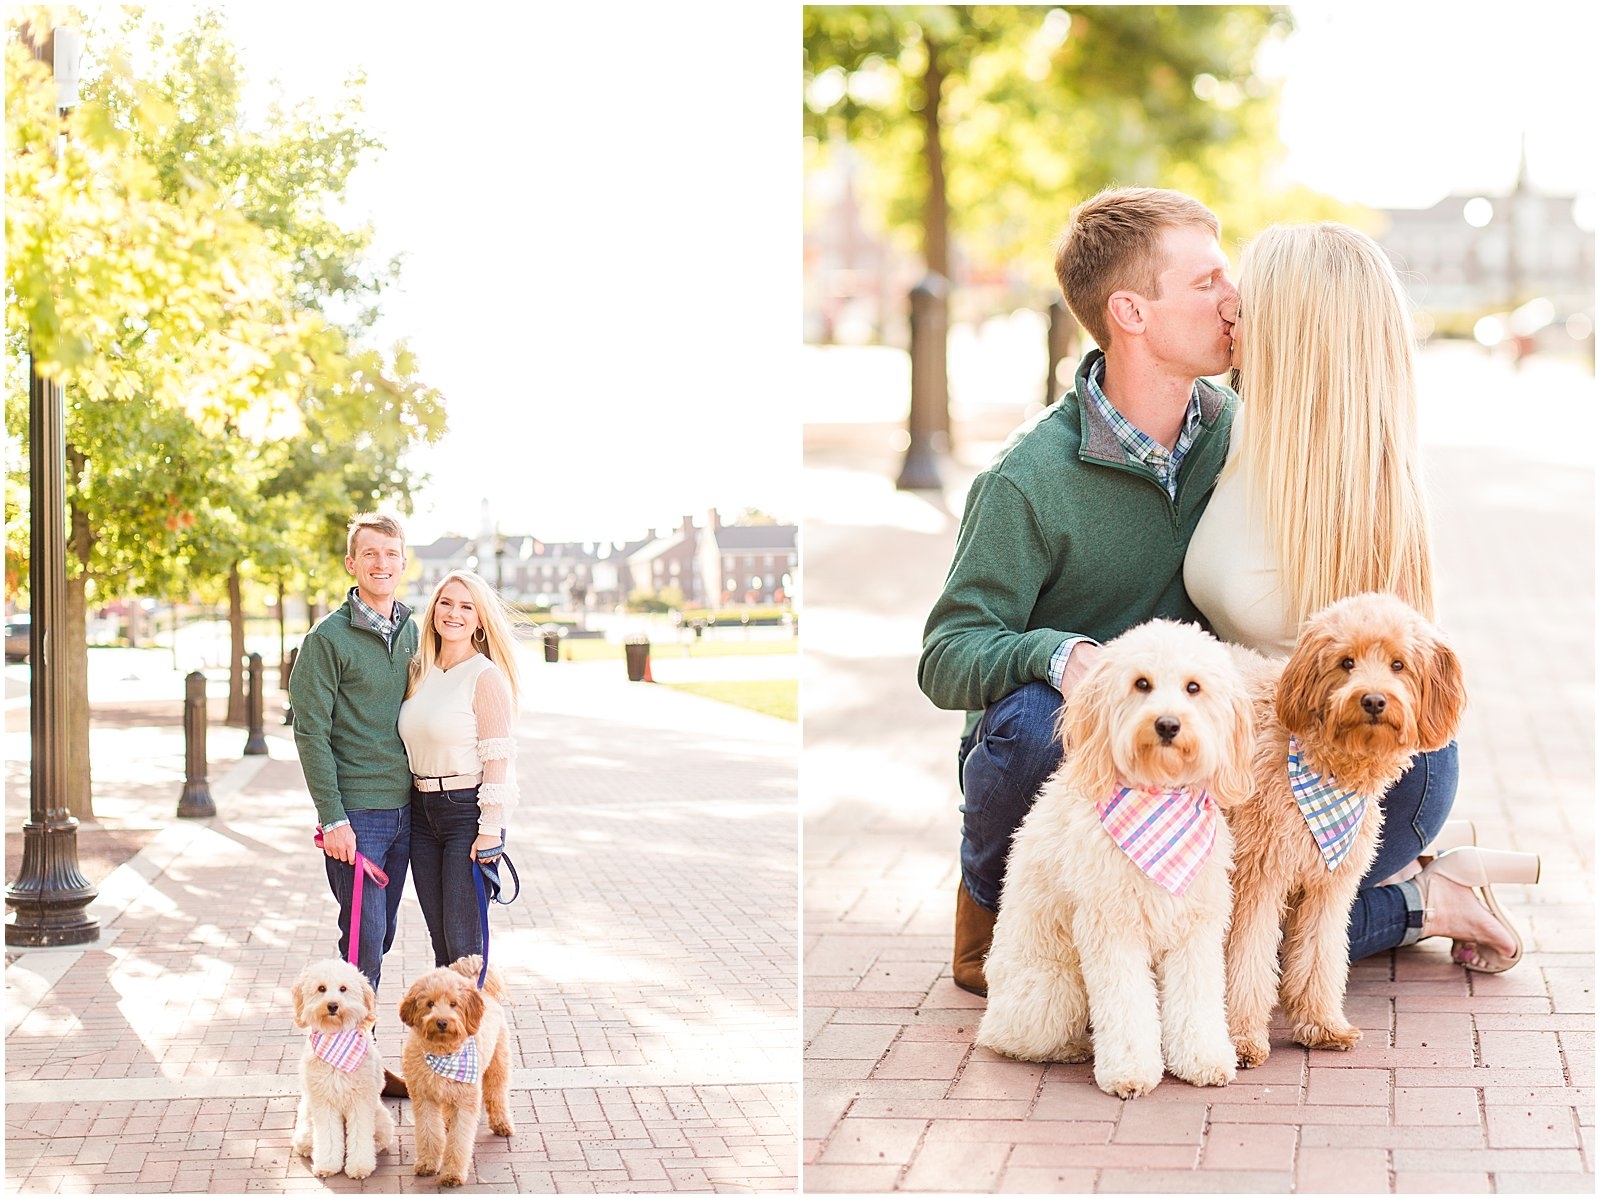 The Best of Engagement Sessions 2020 Recap0005.jpg